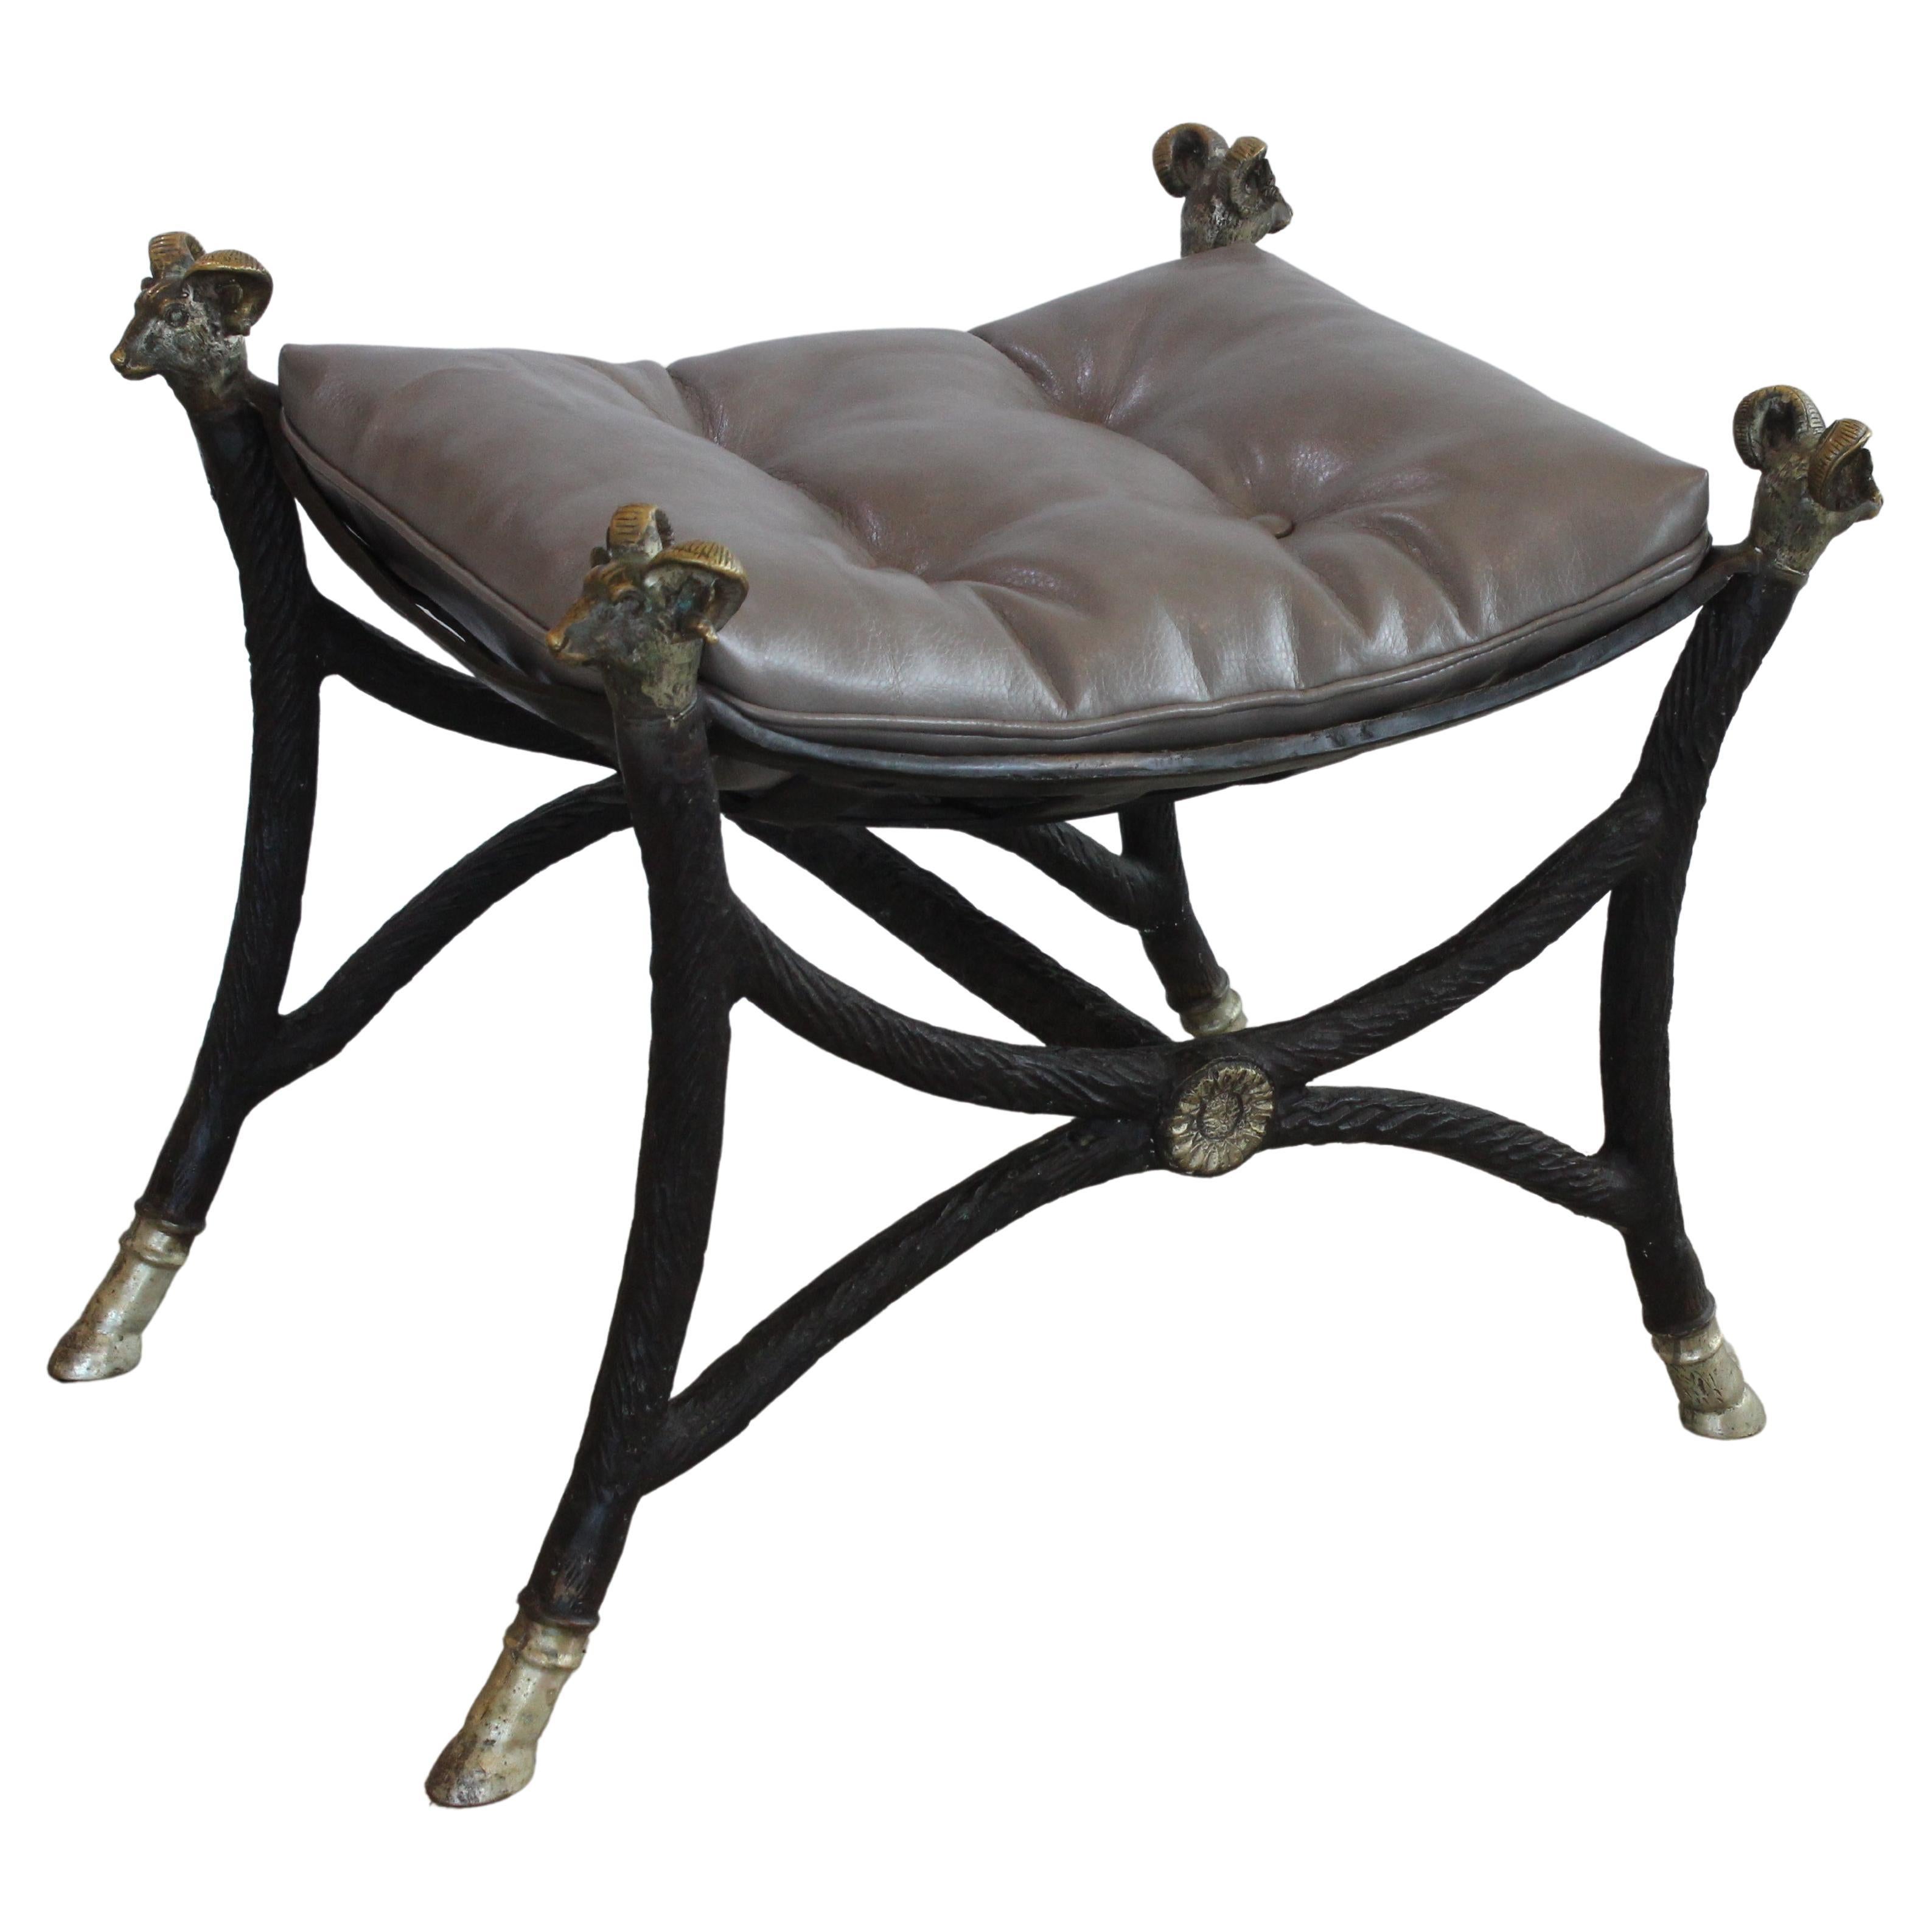 This stylish, chic and Neo Classical form bronze bench dates to the 1980s, and was created for Maitland Smith. 

Note: The dove gray leather cushion was custom created in January of 2023.

Note: The leather cushion has a hidden zipper on one